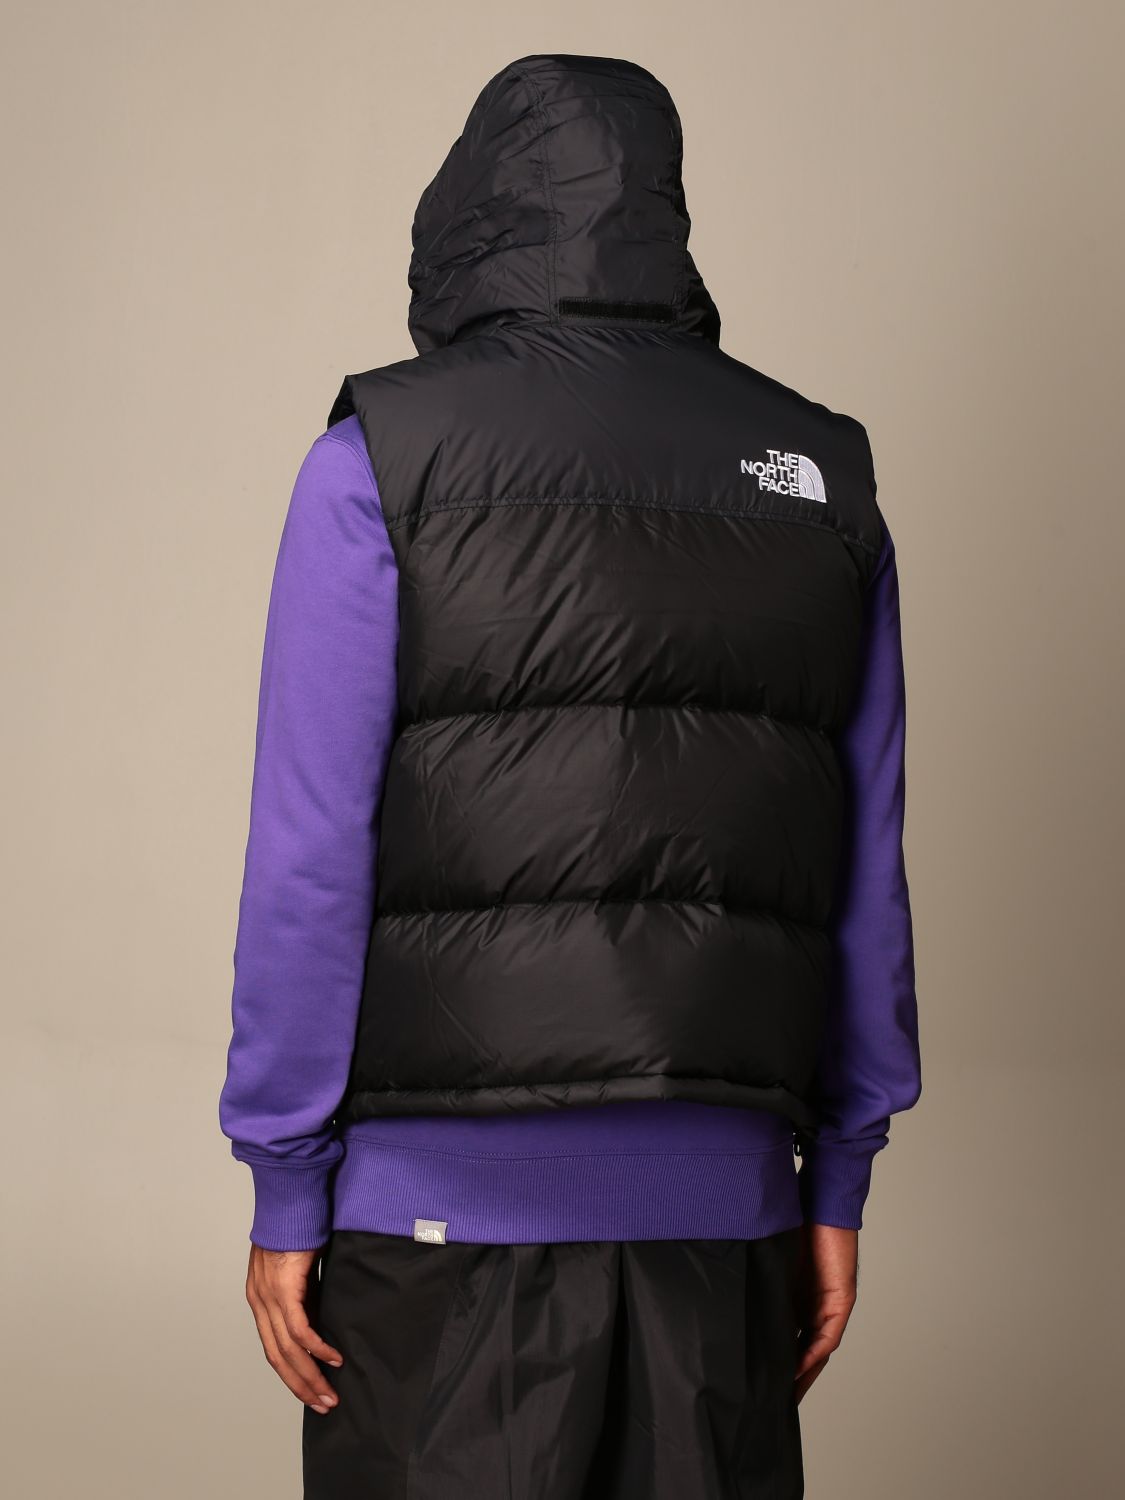 THE NORTH FACE: jacket for men - Black | The North Face jacket NF0A3JQQ ...